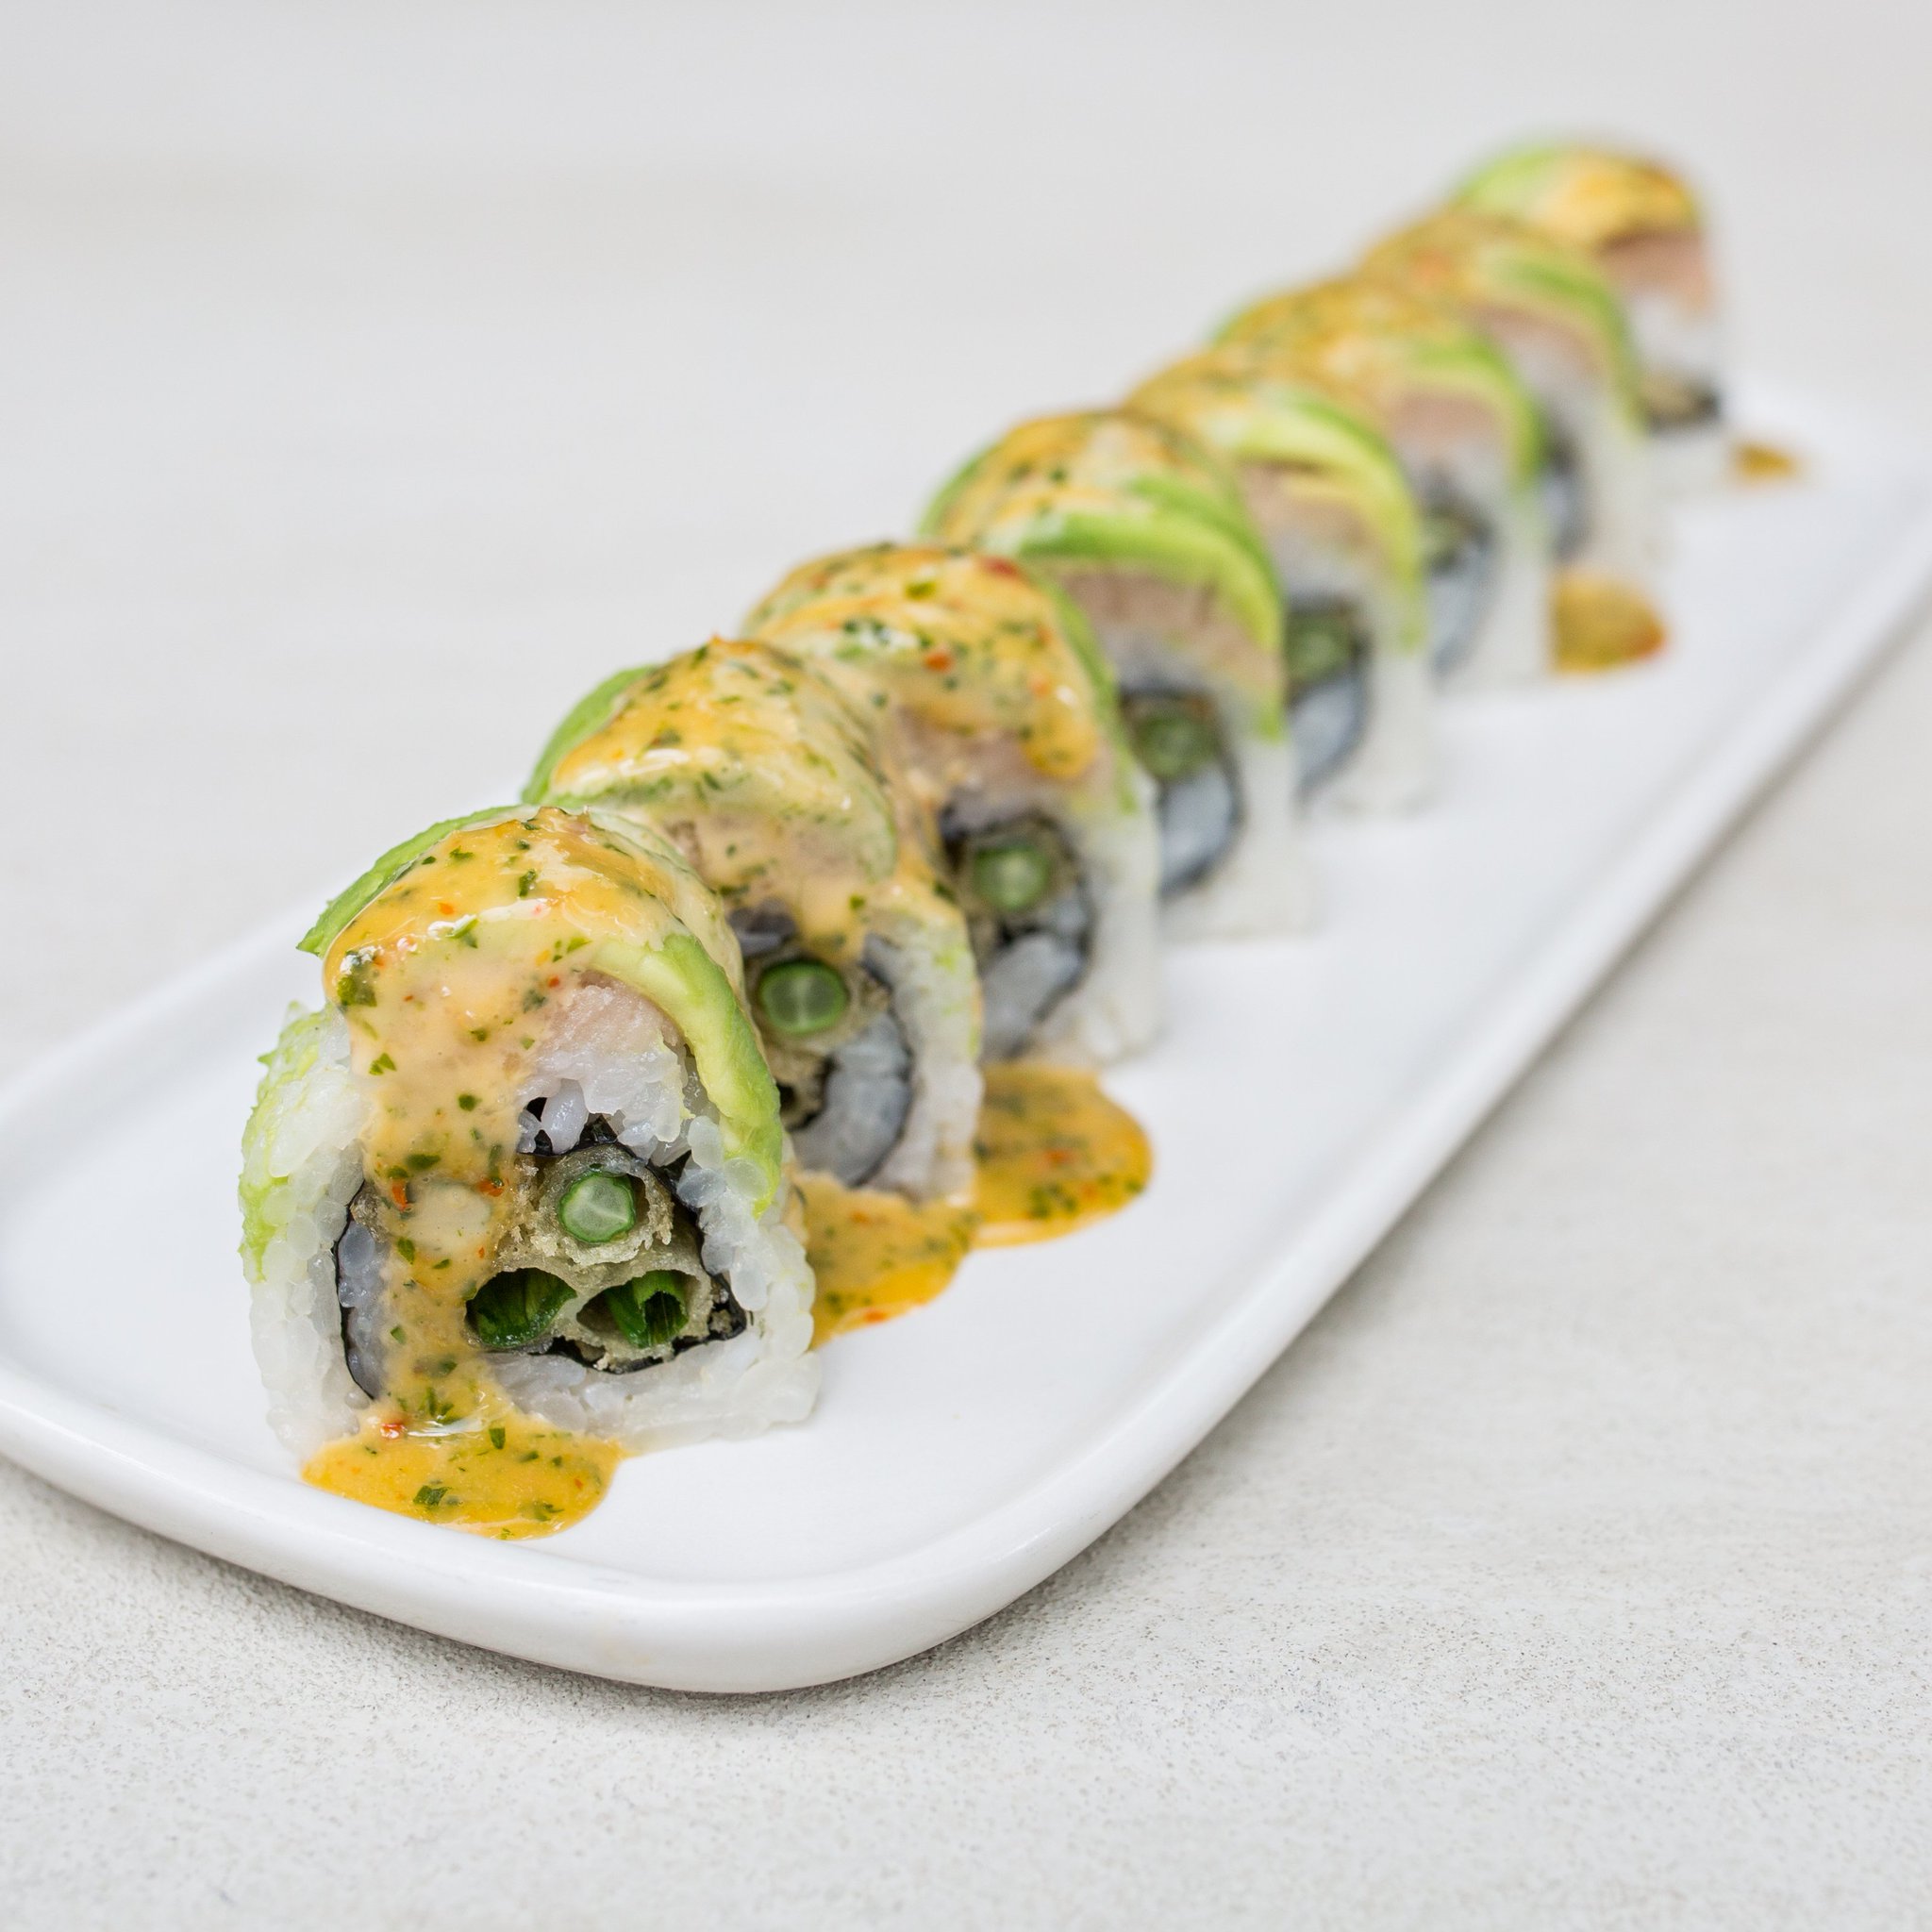 Bamboo Sushi on X: One of your favorites — The Green Machine